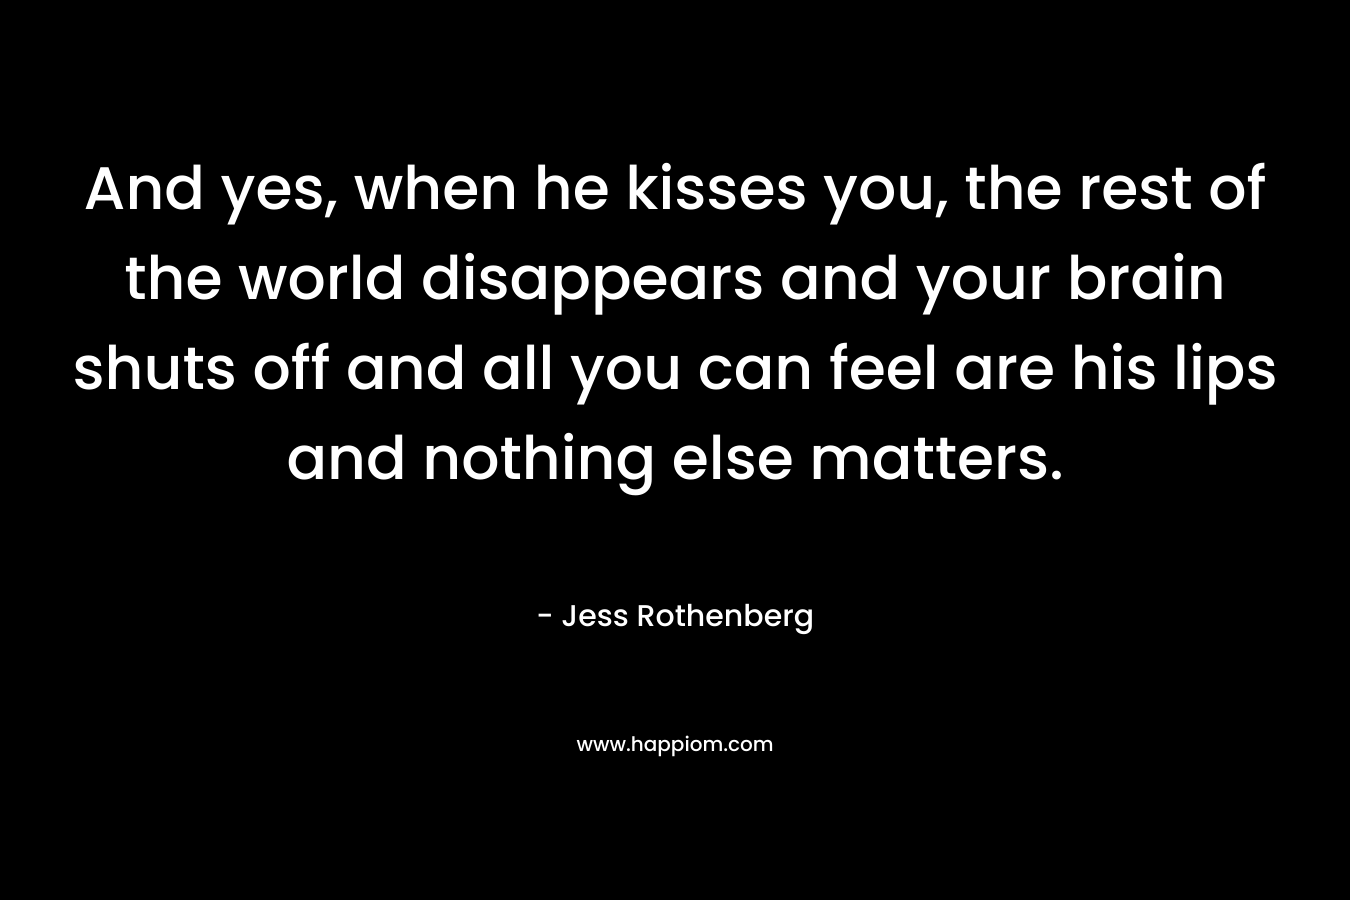 And yes, when he kisses you, the rest of the world disappears and your brain shuts off and all you can feel are his lips and nothing else matters. – Jess Rothenberg